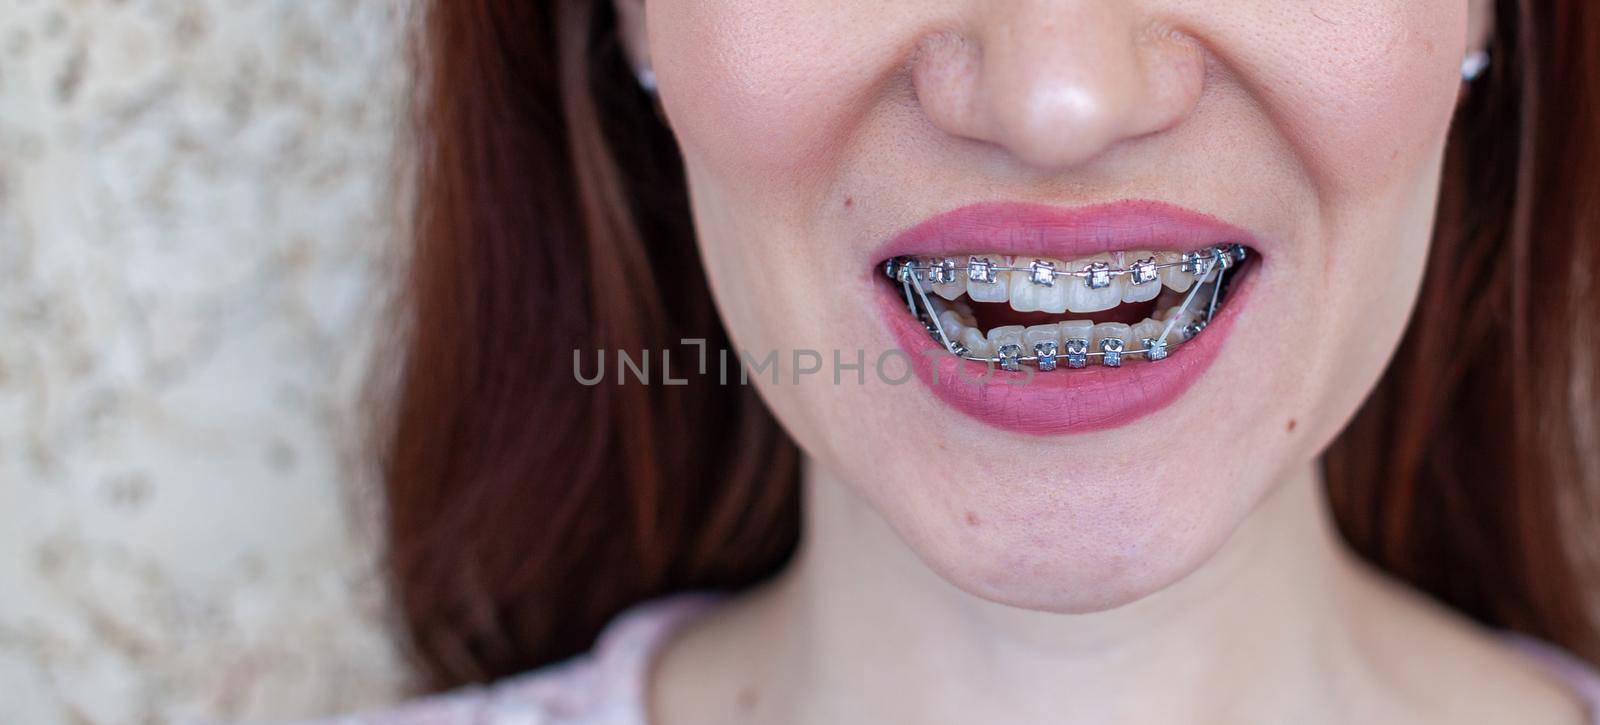 Braces on the teeth of a girl who smiles, close-up lips,  by AnatoliiFoto